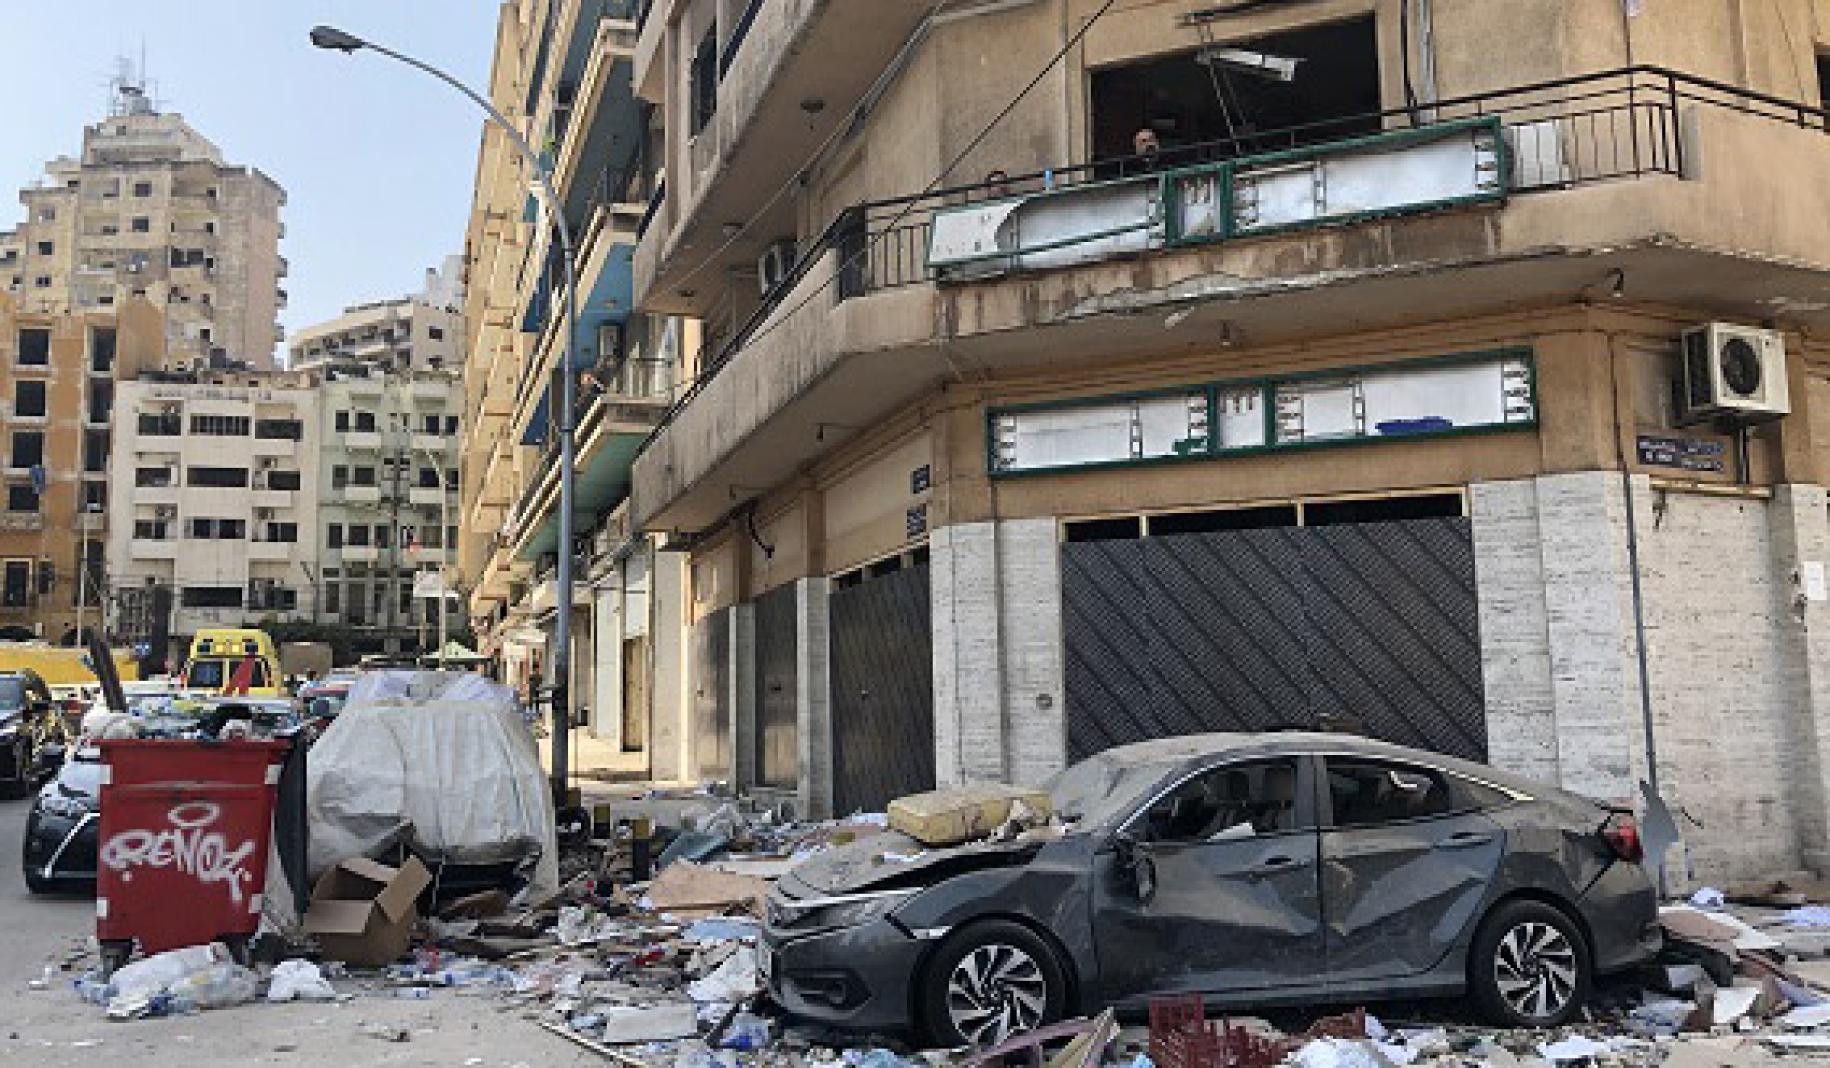 The photo depicts the immense physical damage the blast placed on the city. It shows destroyed cars, buildings and the streets of one of the neighbourhoods impacted.